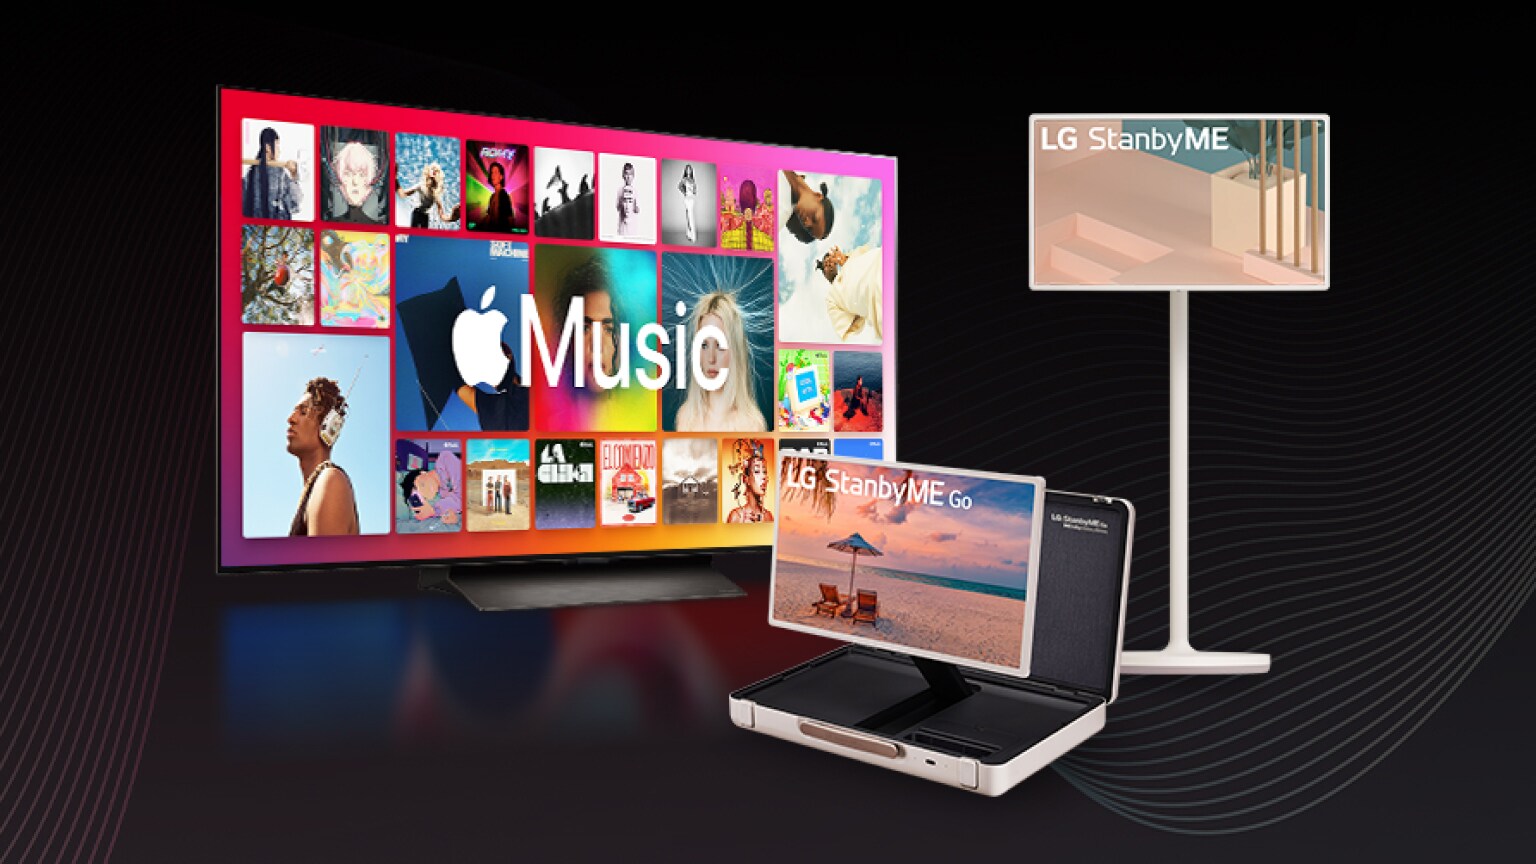 Redeem 3 free months of Apple Music with select LG device